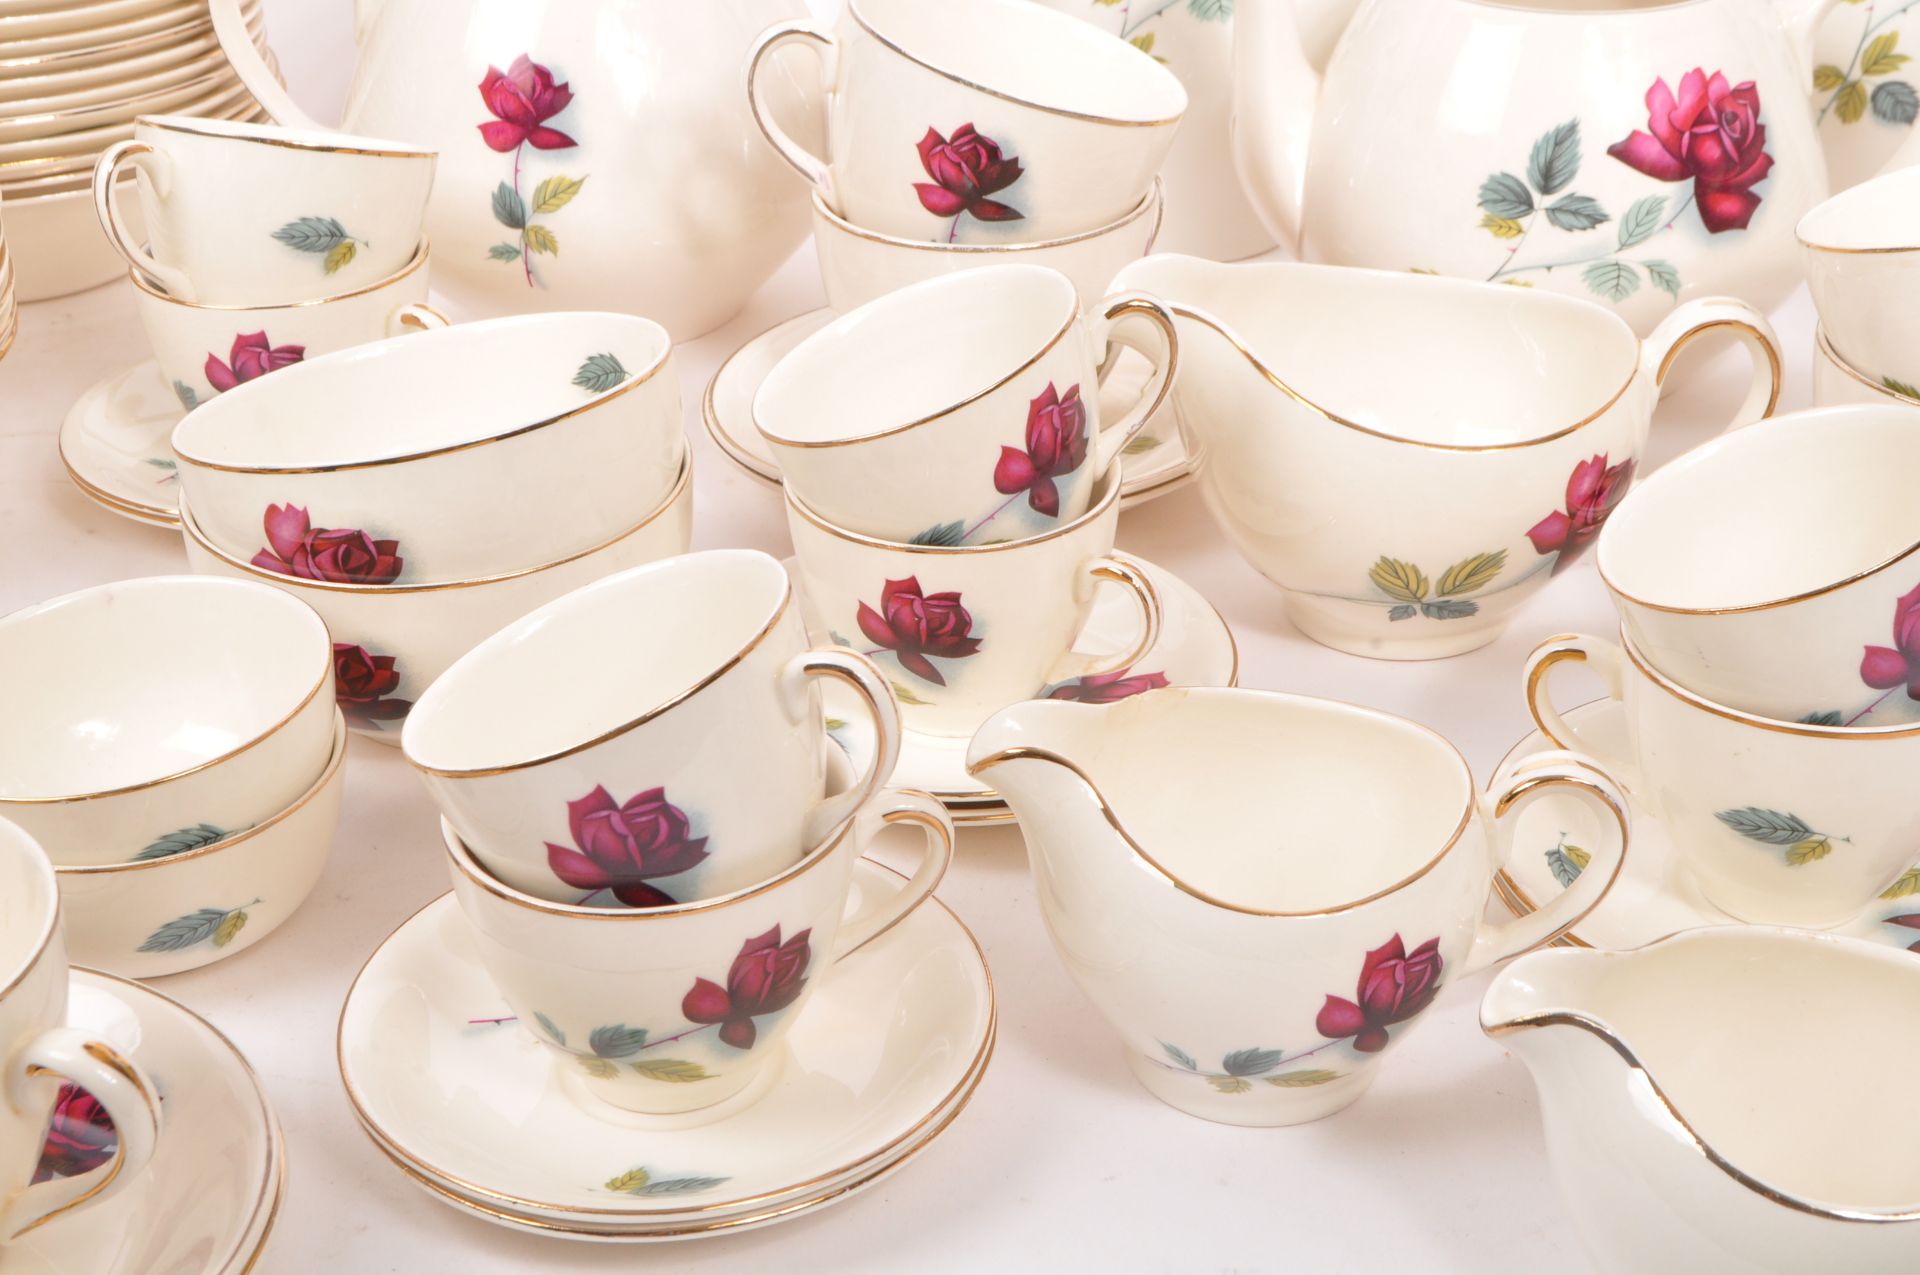 MID CENTURY 1950S REALM ROSE TEA DINNER SERVICE ALFRED MEAKIN - Image 3 of 7